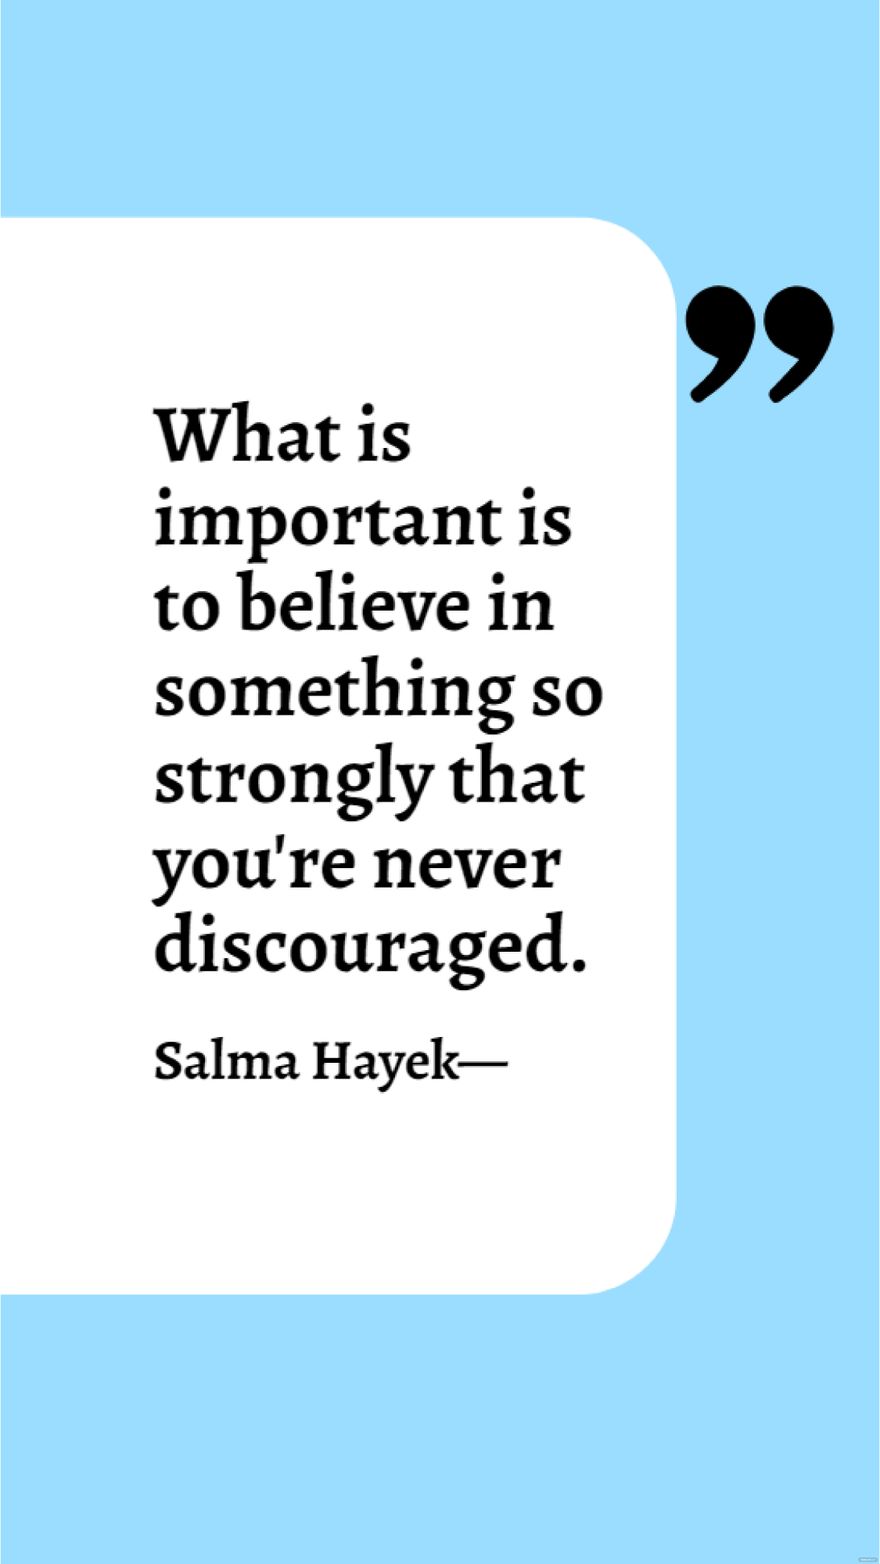 Free Salma Hayek - What is important is to believe in something so strongly that you're never discouraged. in JPG